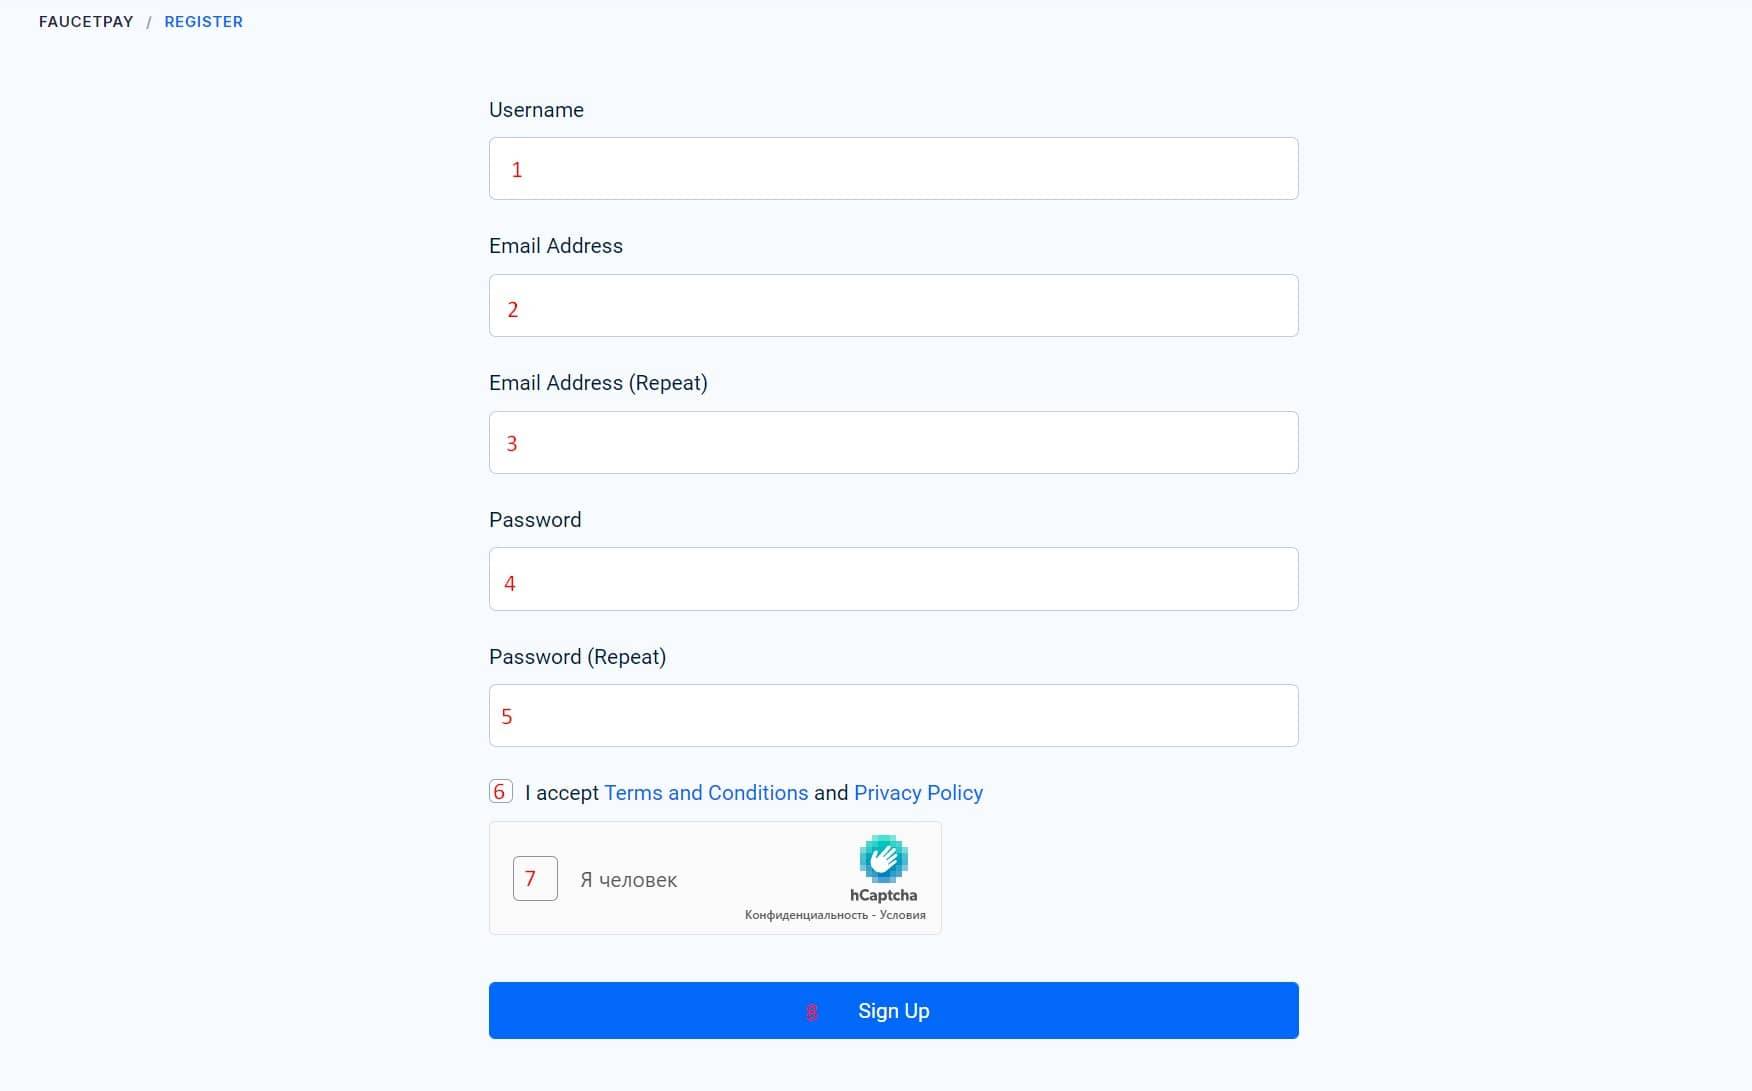 faucetpay sign up